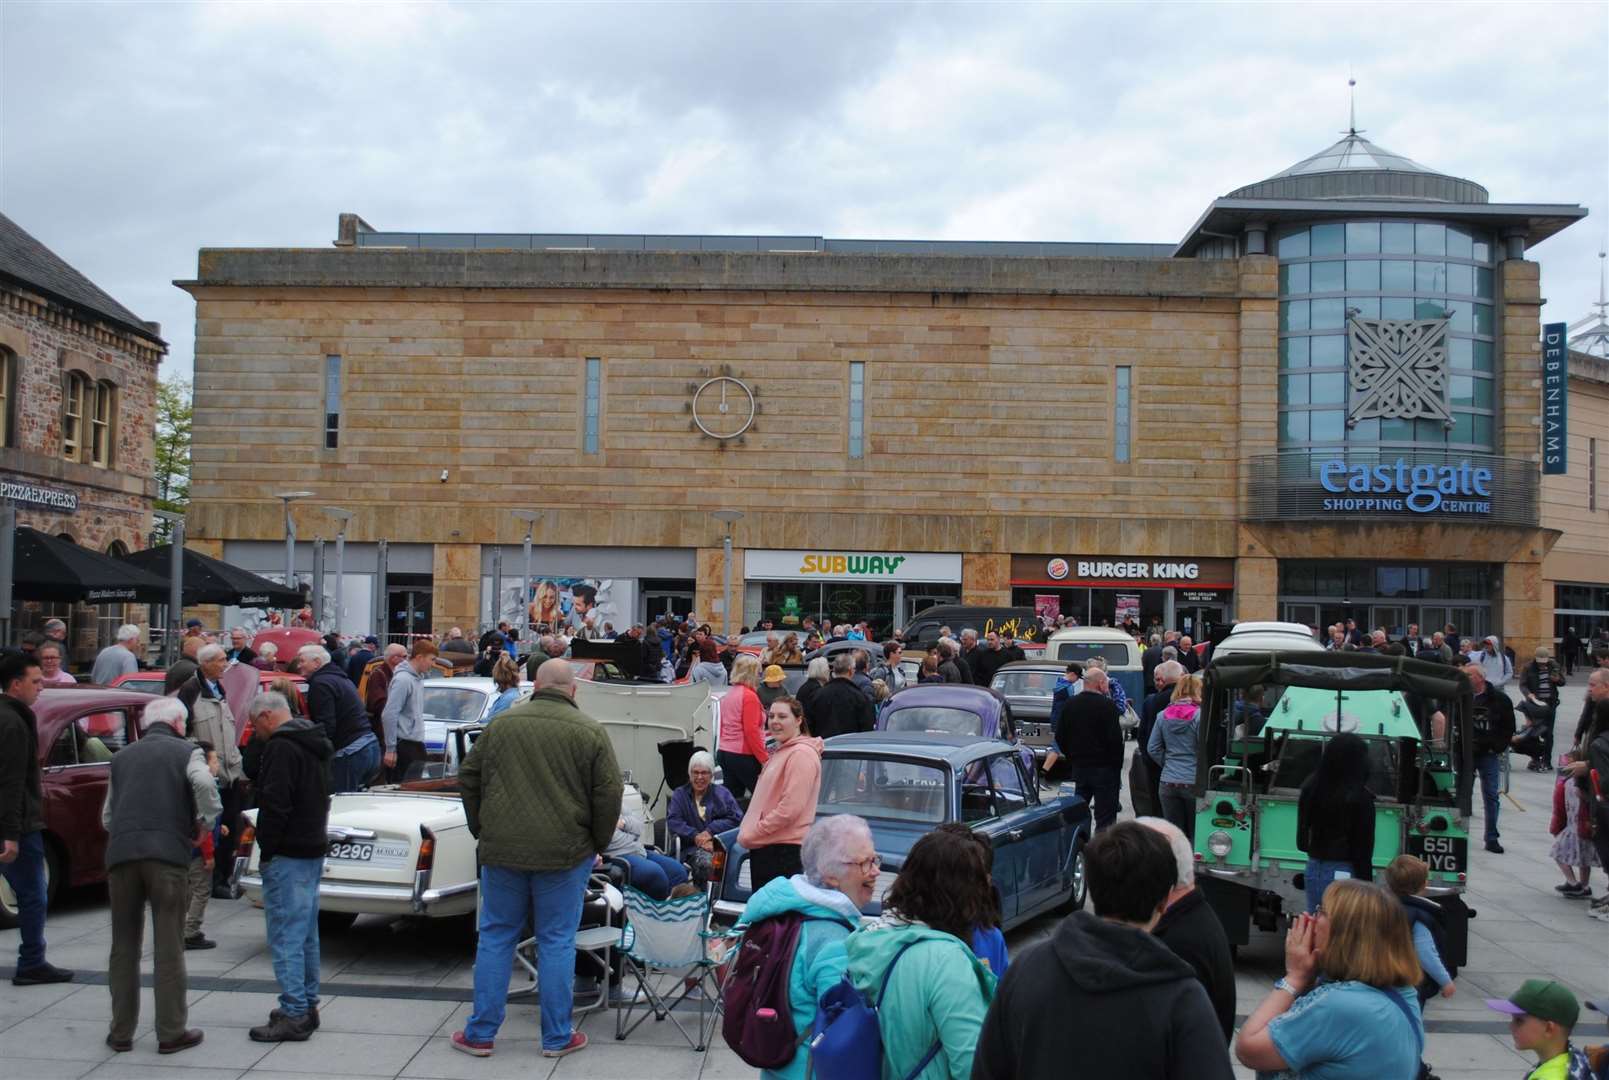 The Classic Vehicle Show drew many spectators. Picture: Tyler Mcneill